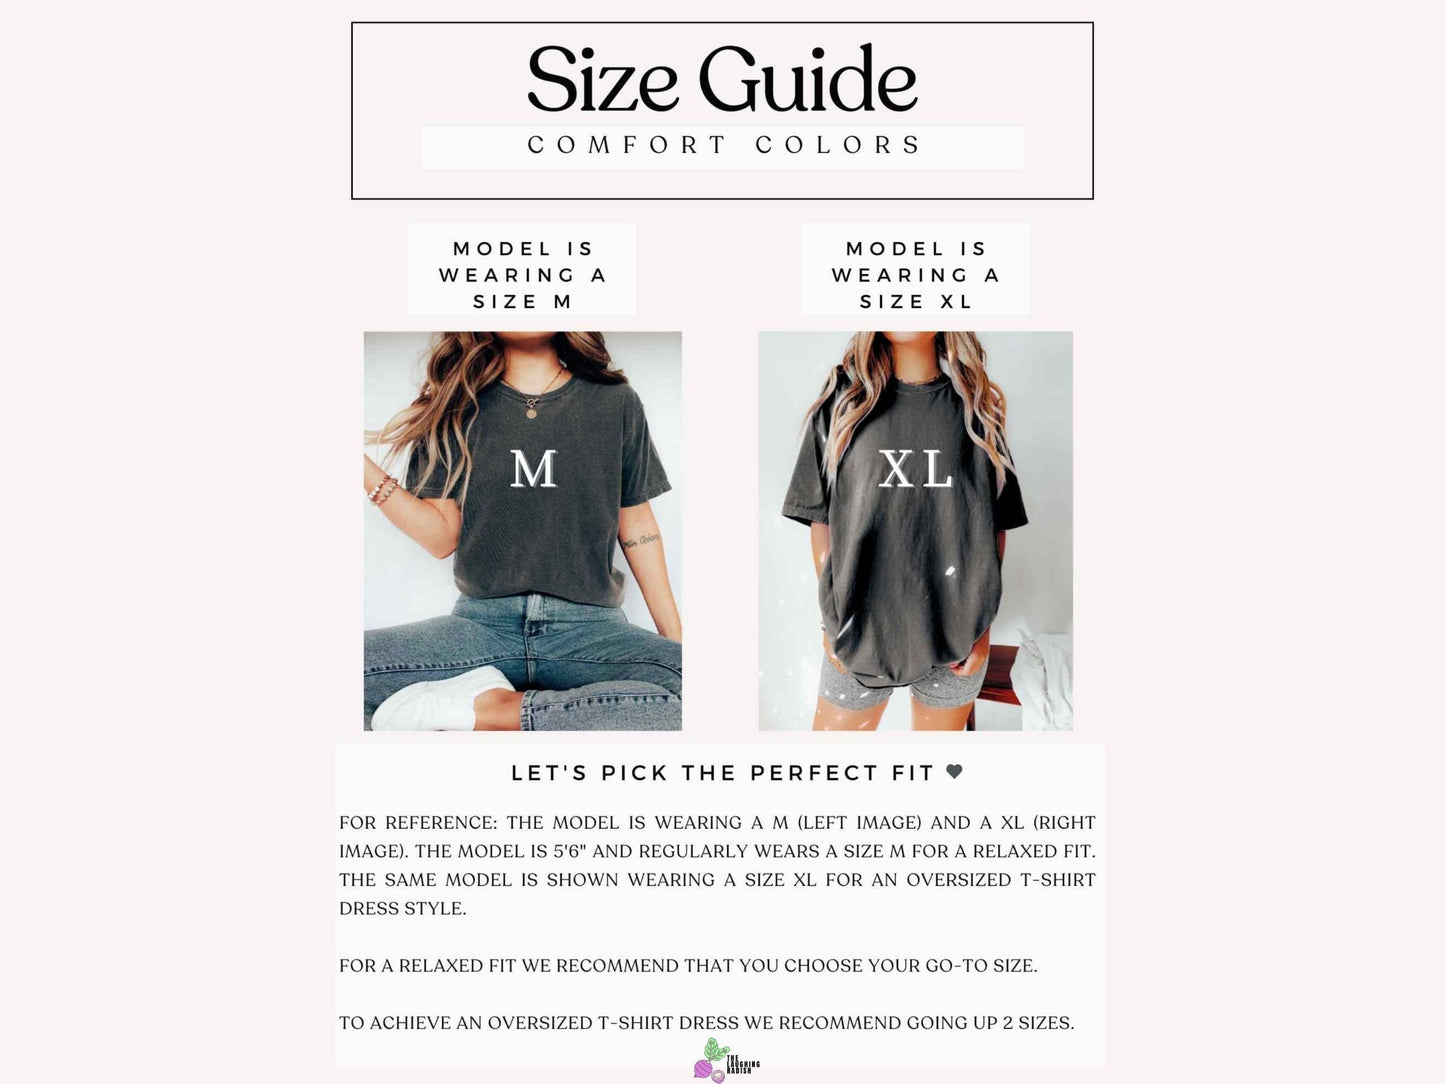 A size guide for comfort colors showing a model wearing different sizes of shirts for consumer reference. The model is 5&#39;6&quot; and regularly wears a size medium for a relaxed fit.